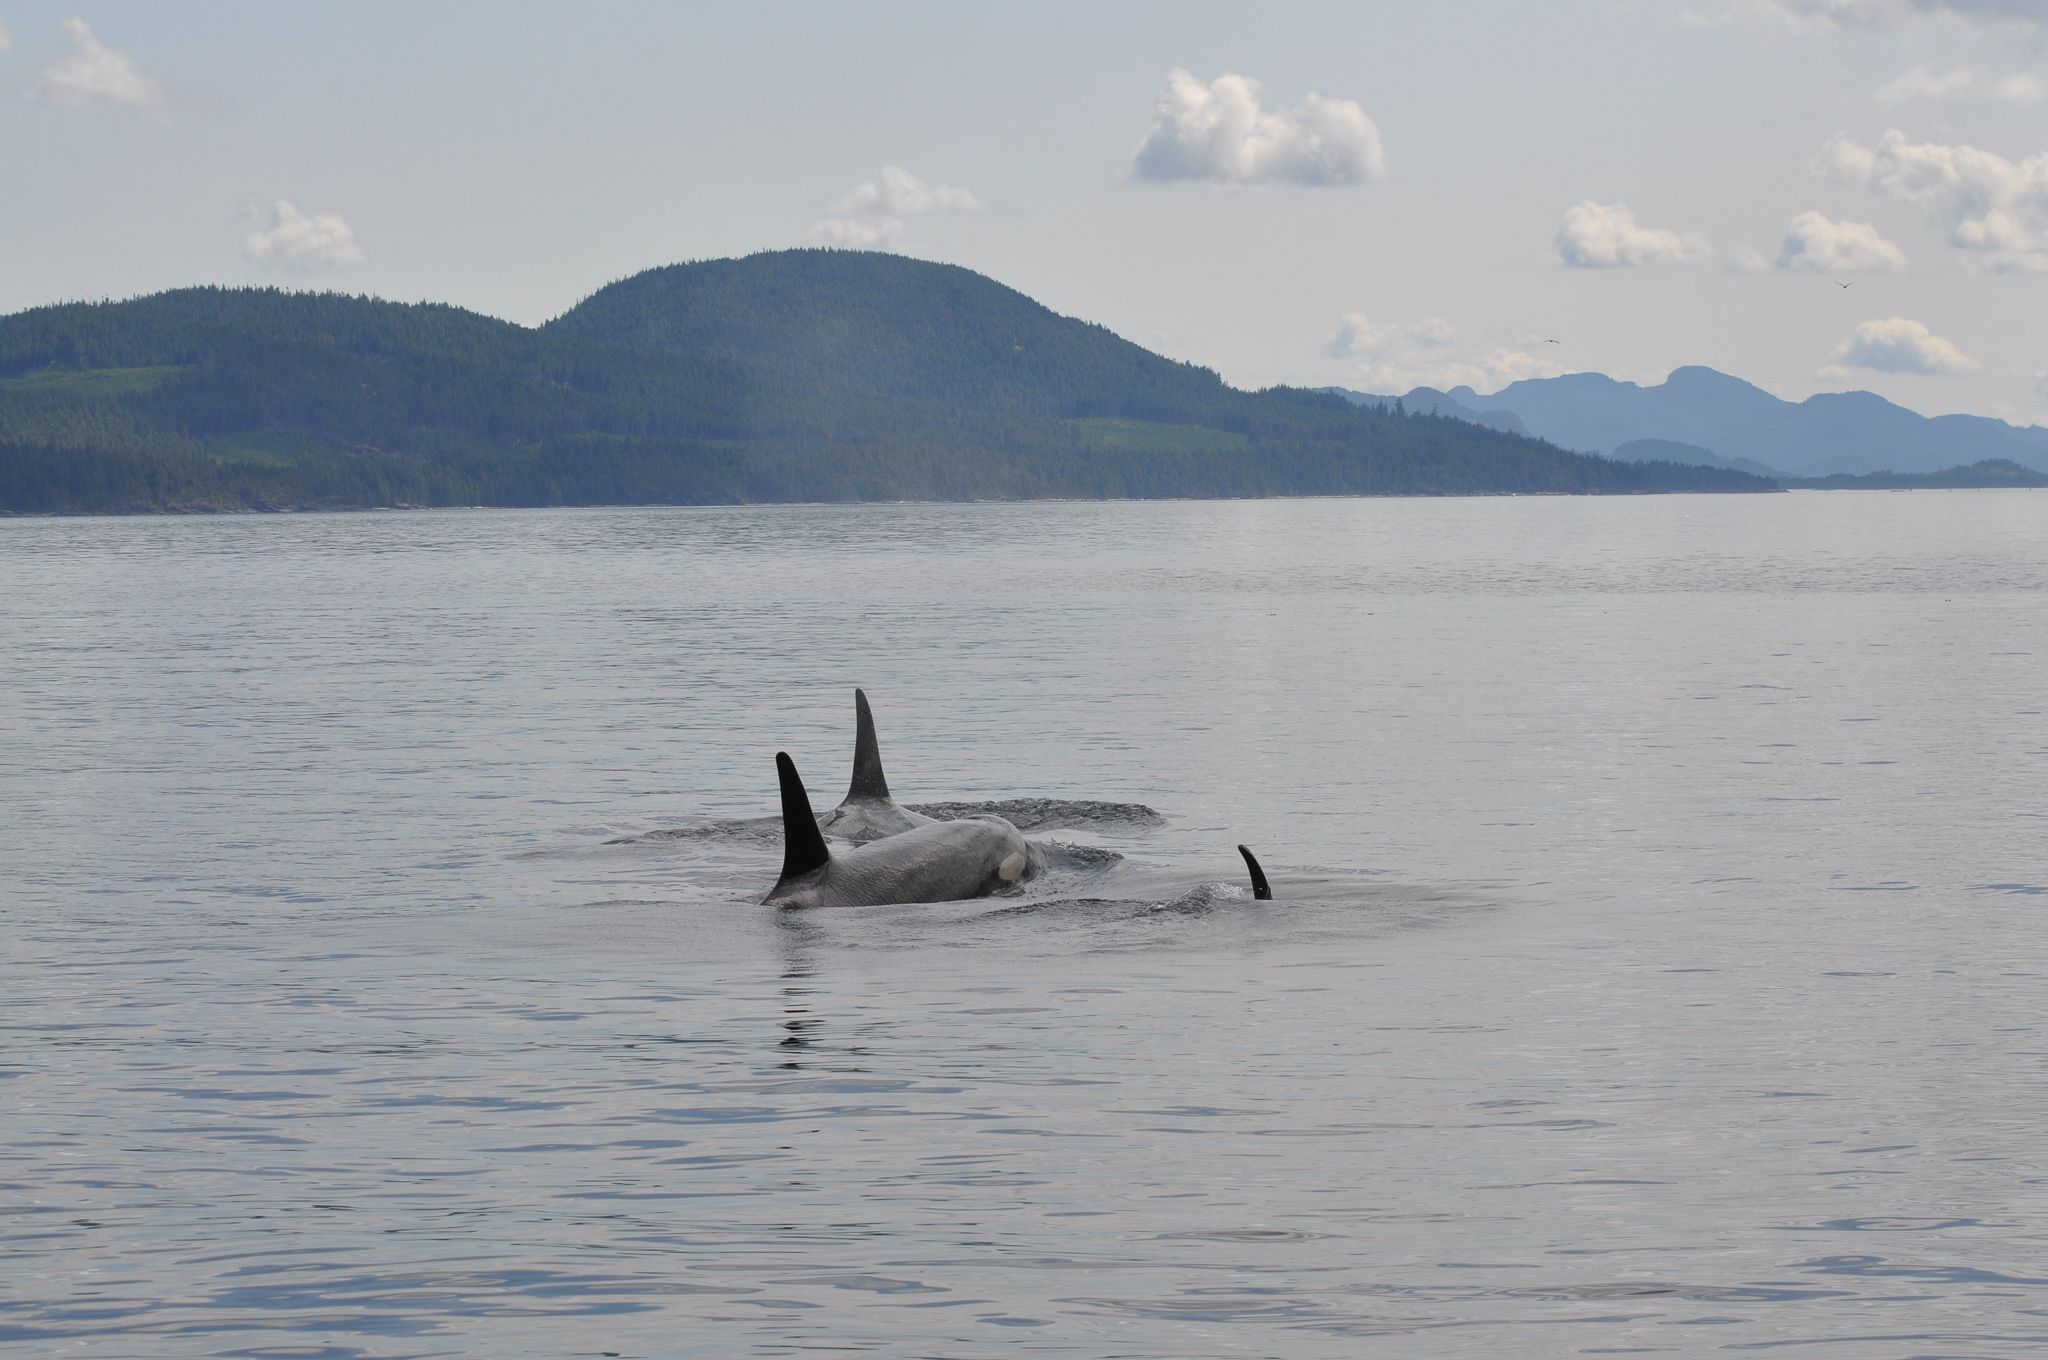 Three orcas popping up in the water. Hills in the background.